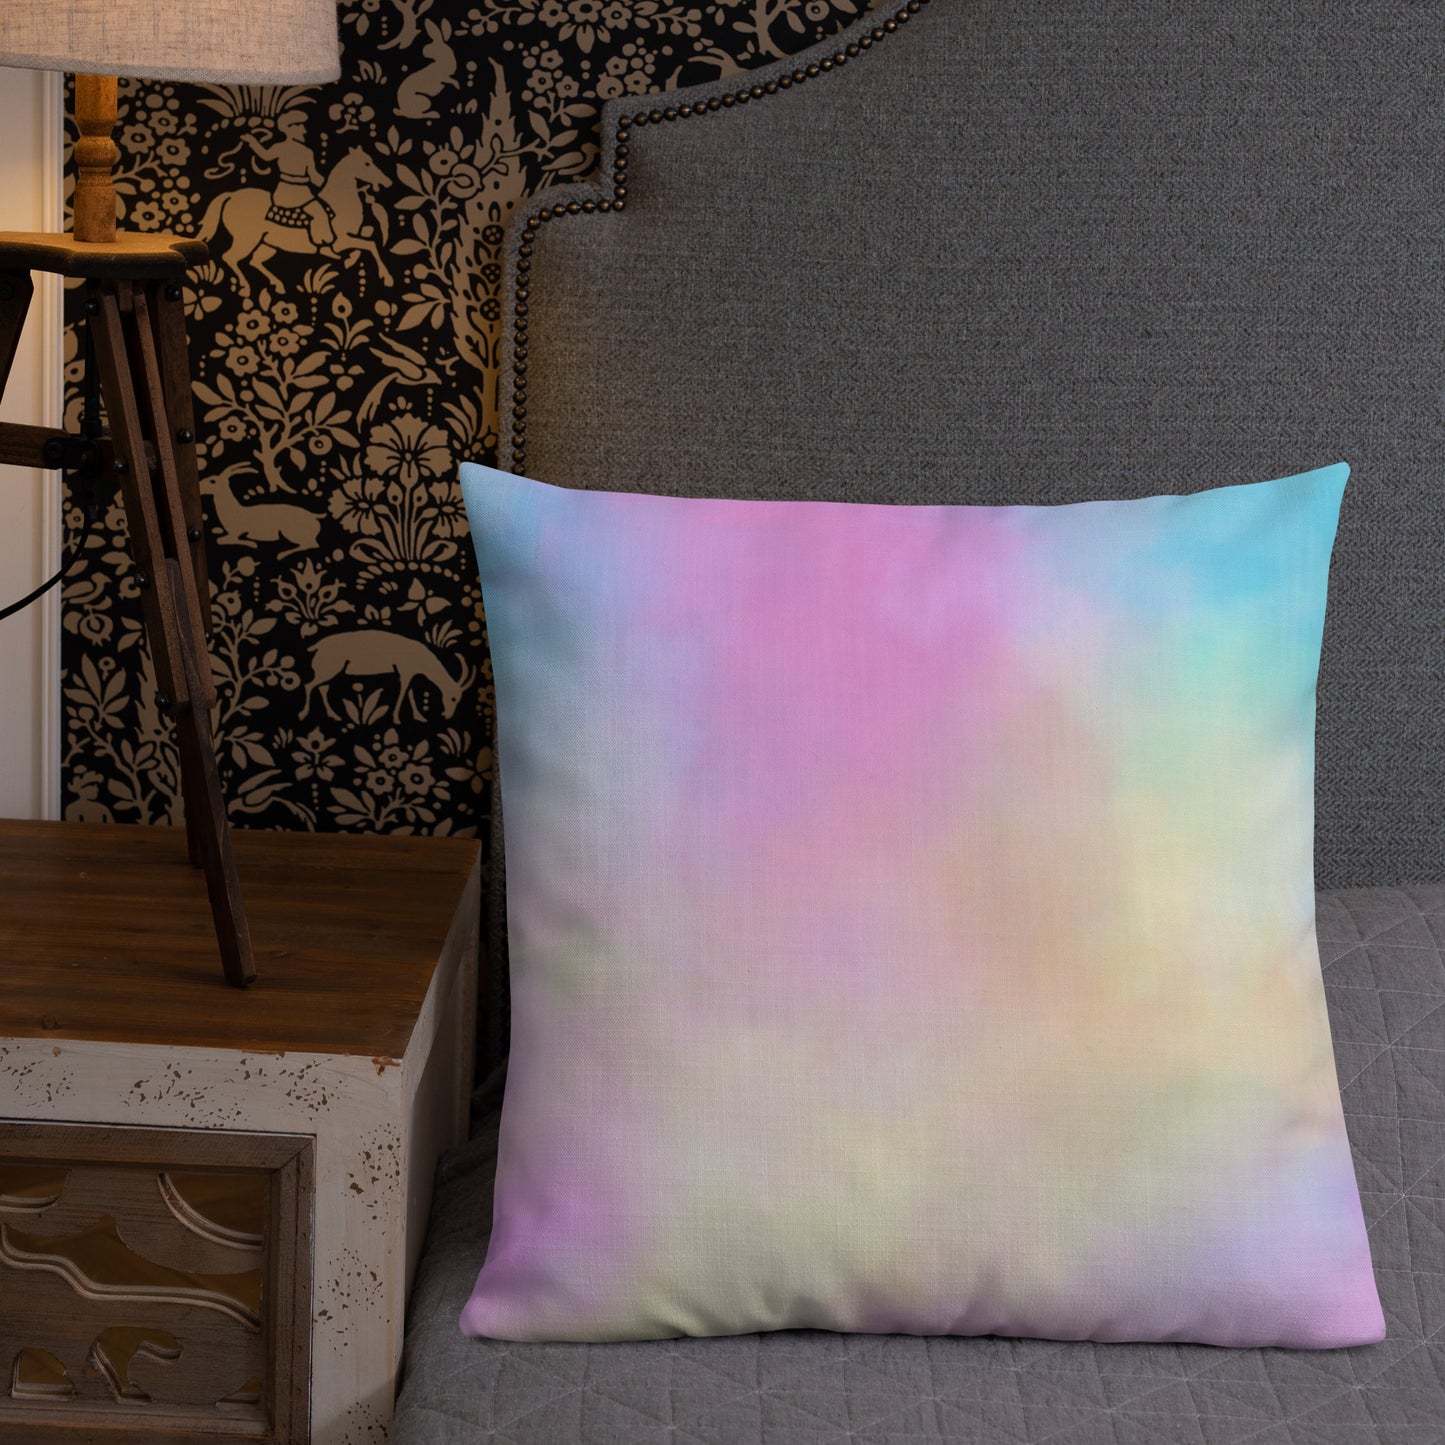 4 Directions Pillow